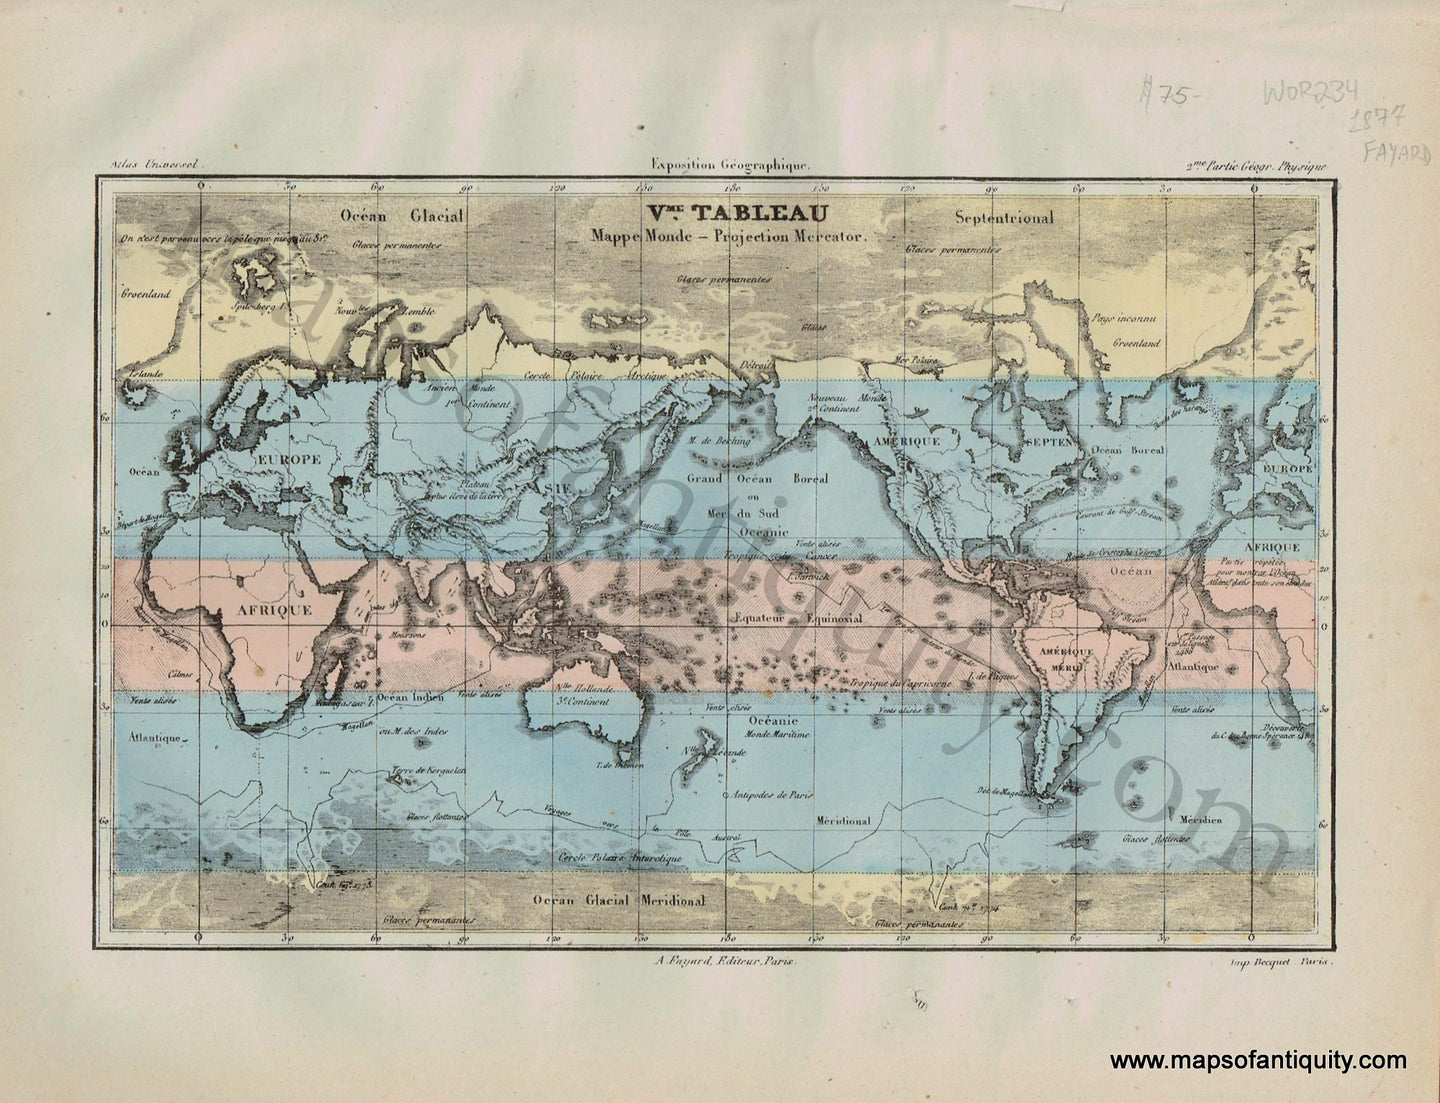 Antique-Mappe-Monde-Tableau-Projection-Mercator-World-Global-Fayard-Atlas-Universel-French-1877-1870s-1800s-Mid-Late-19th-Century-Maps-of-Antiquity